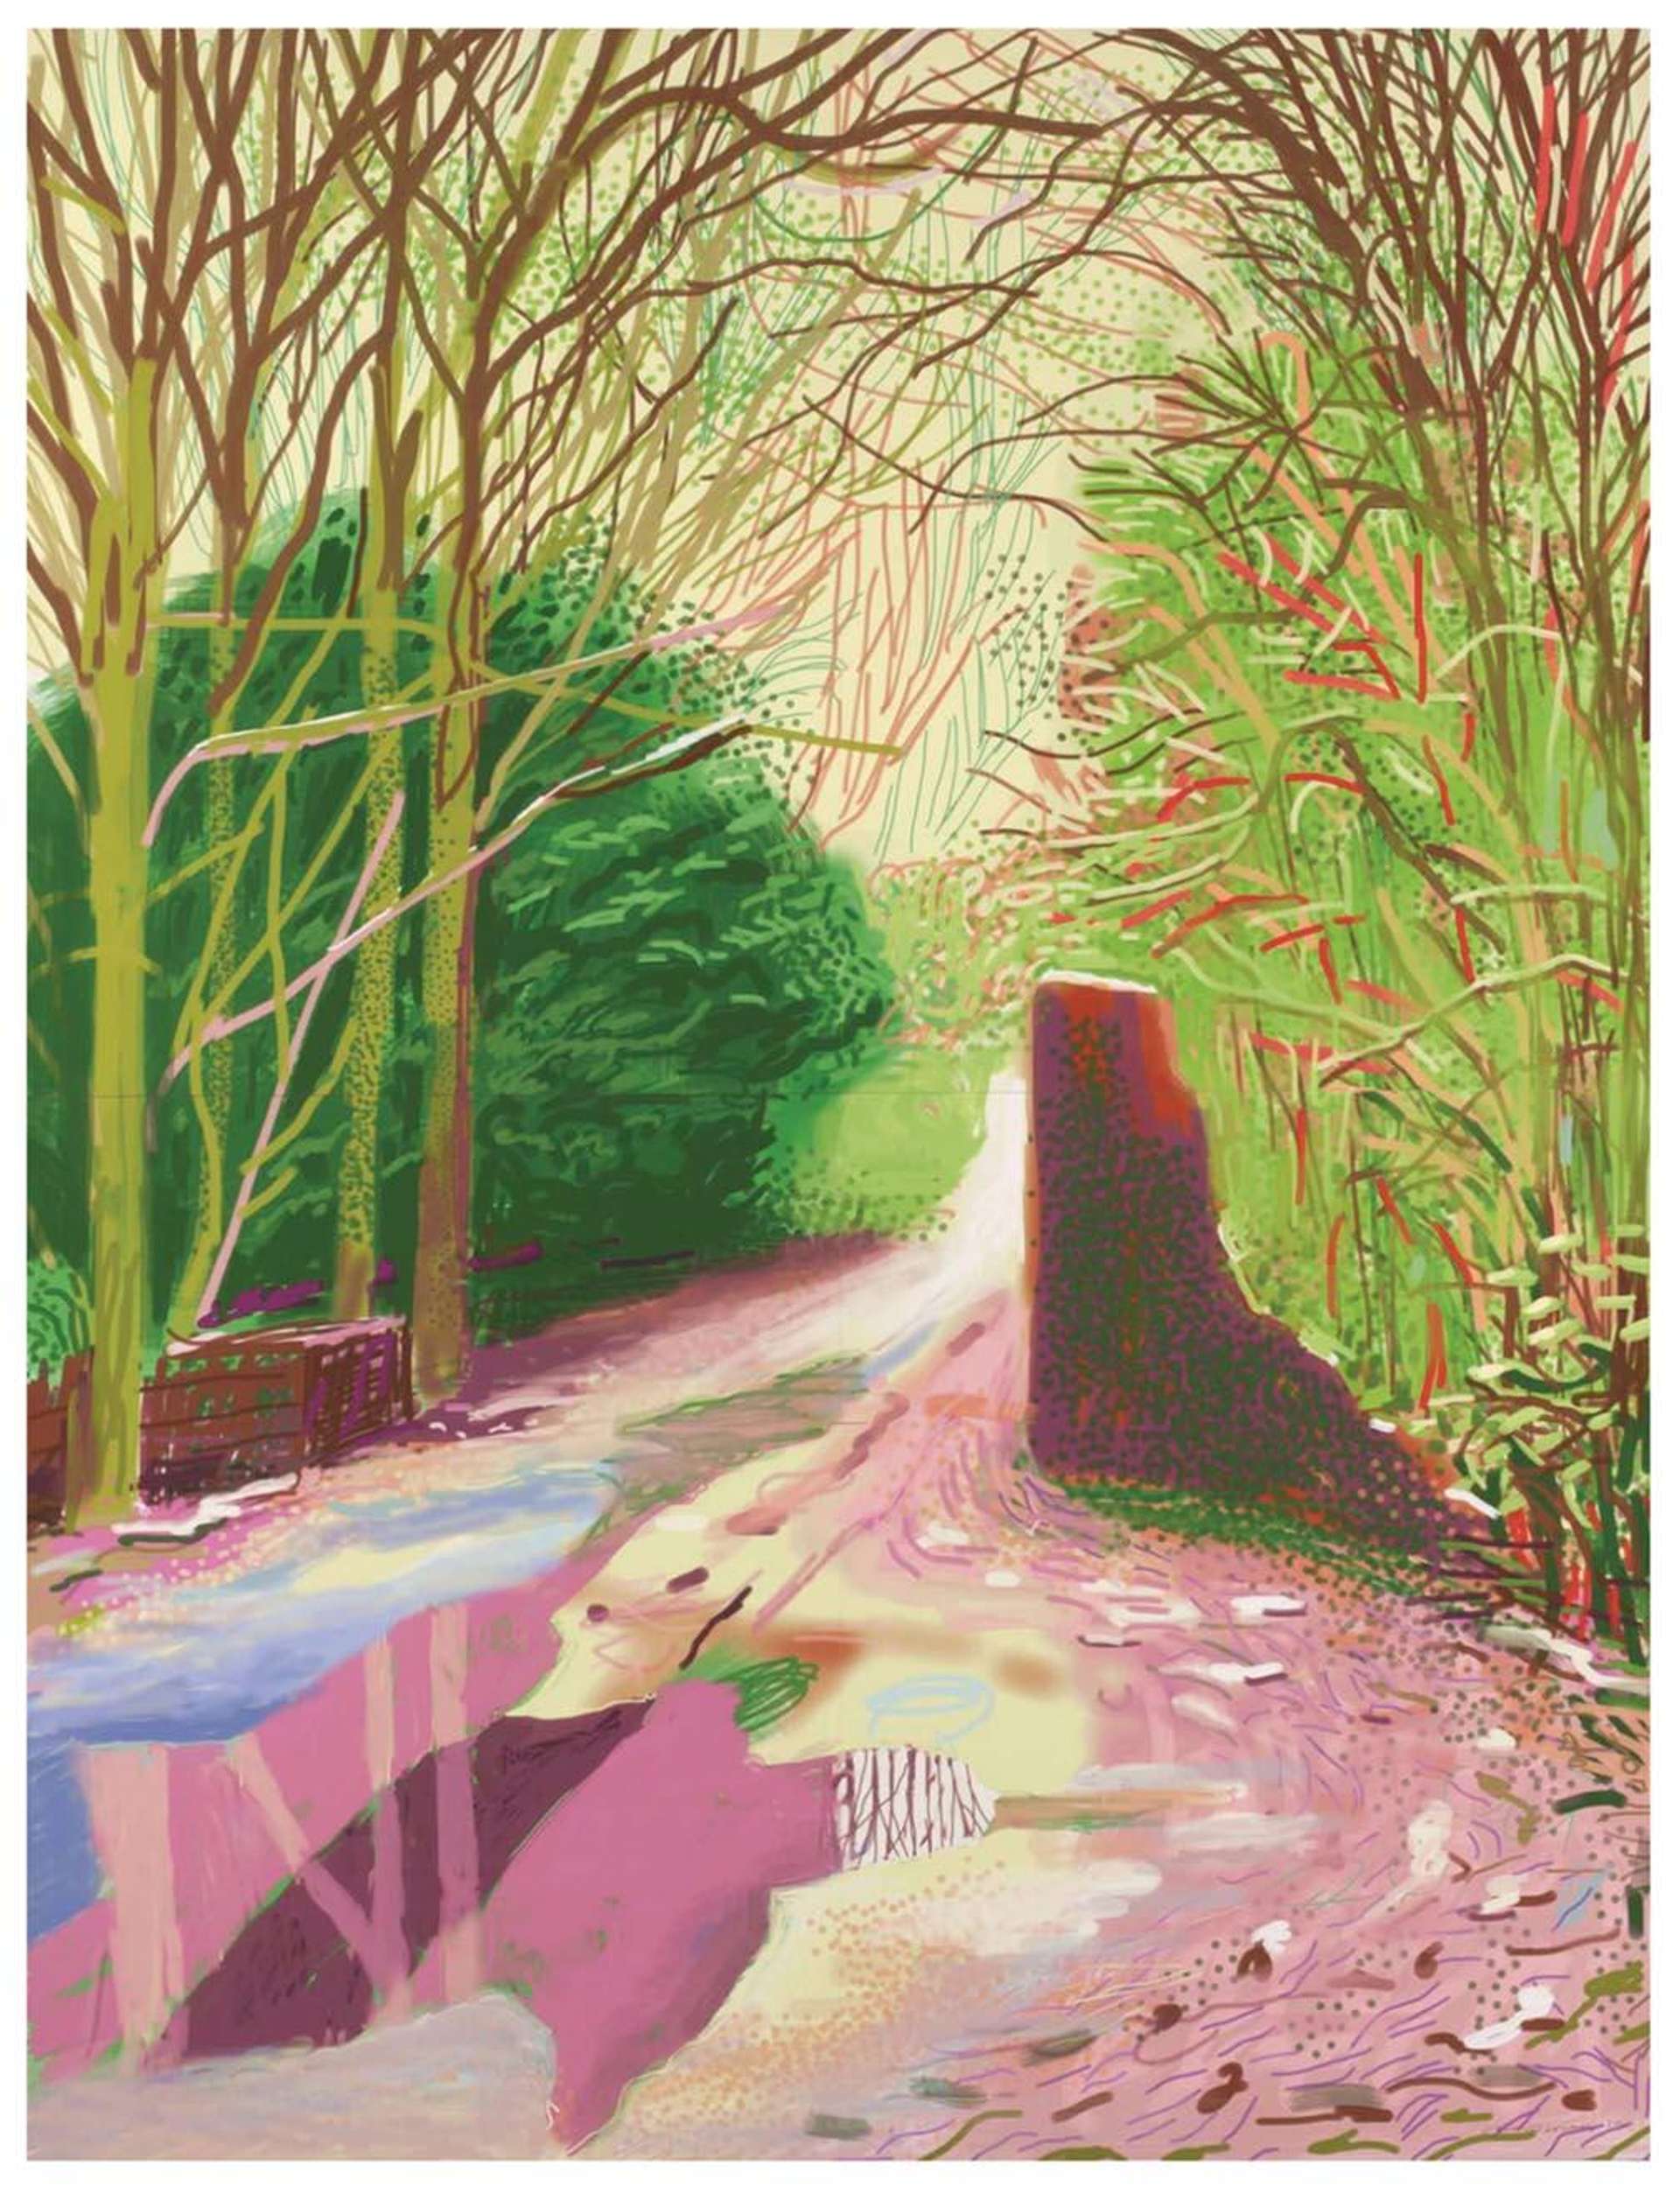 David Hockney’s The Arrival Of Spring In Woldgate, East Yorkshire 2nd January 2011. A digital print of an outdoor landscape with trees without leaves alongside green shrubs with a walking path in pink. 